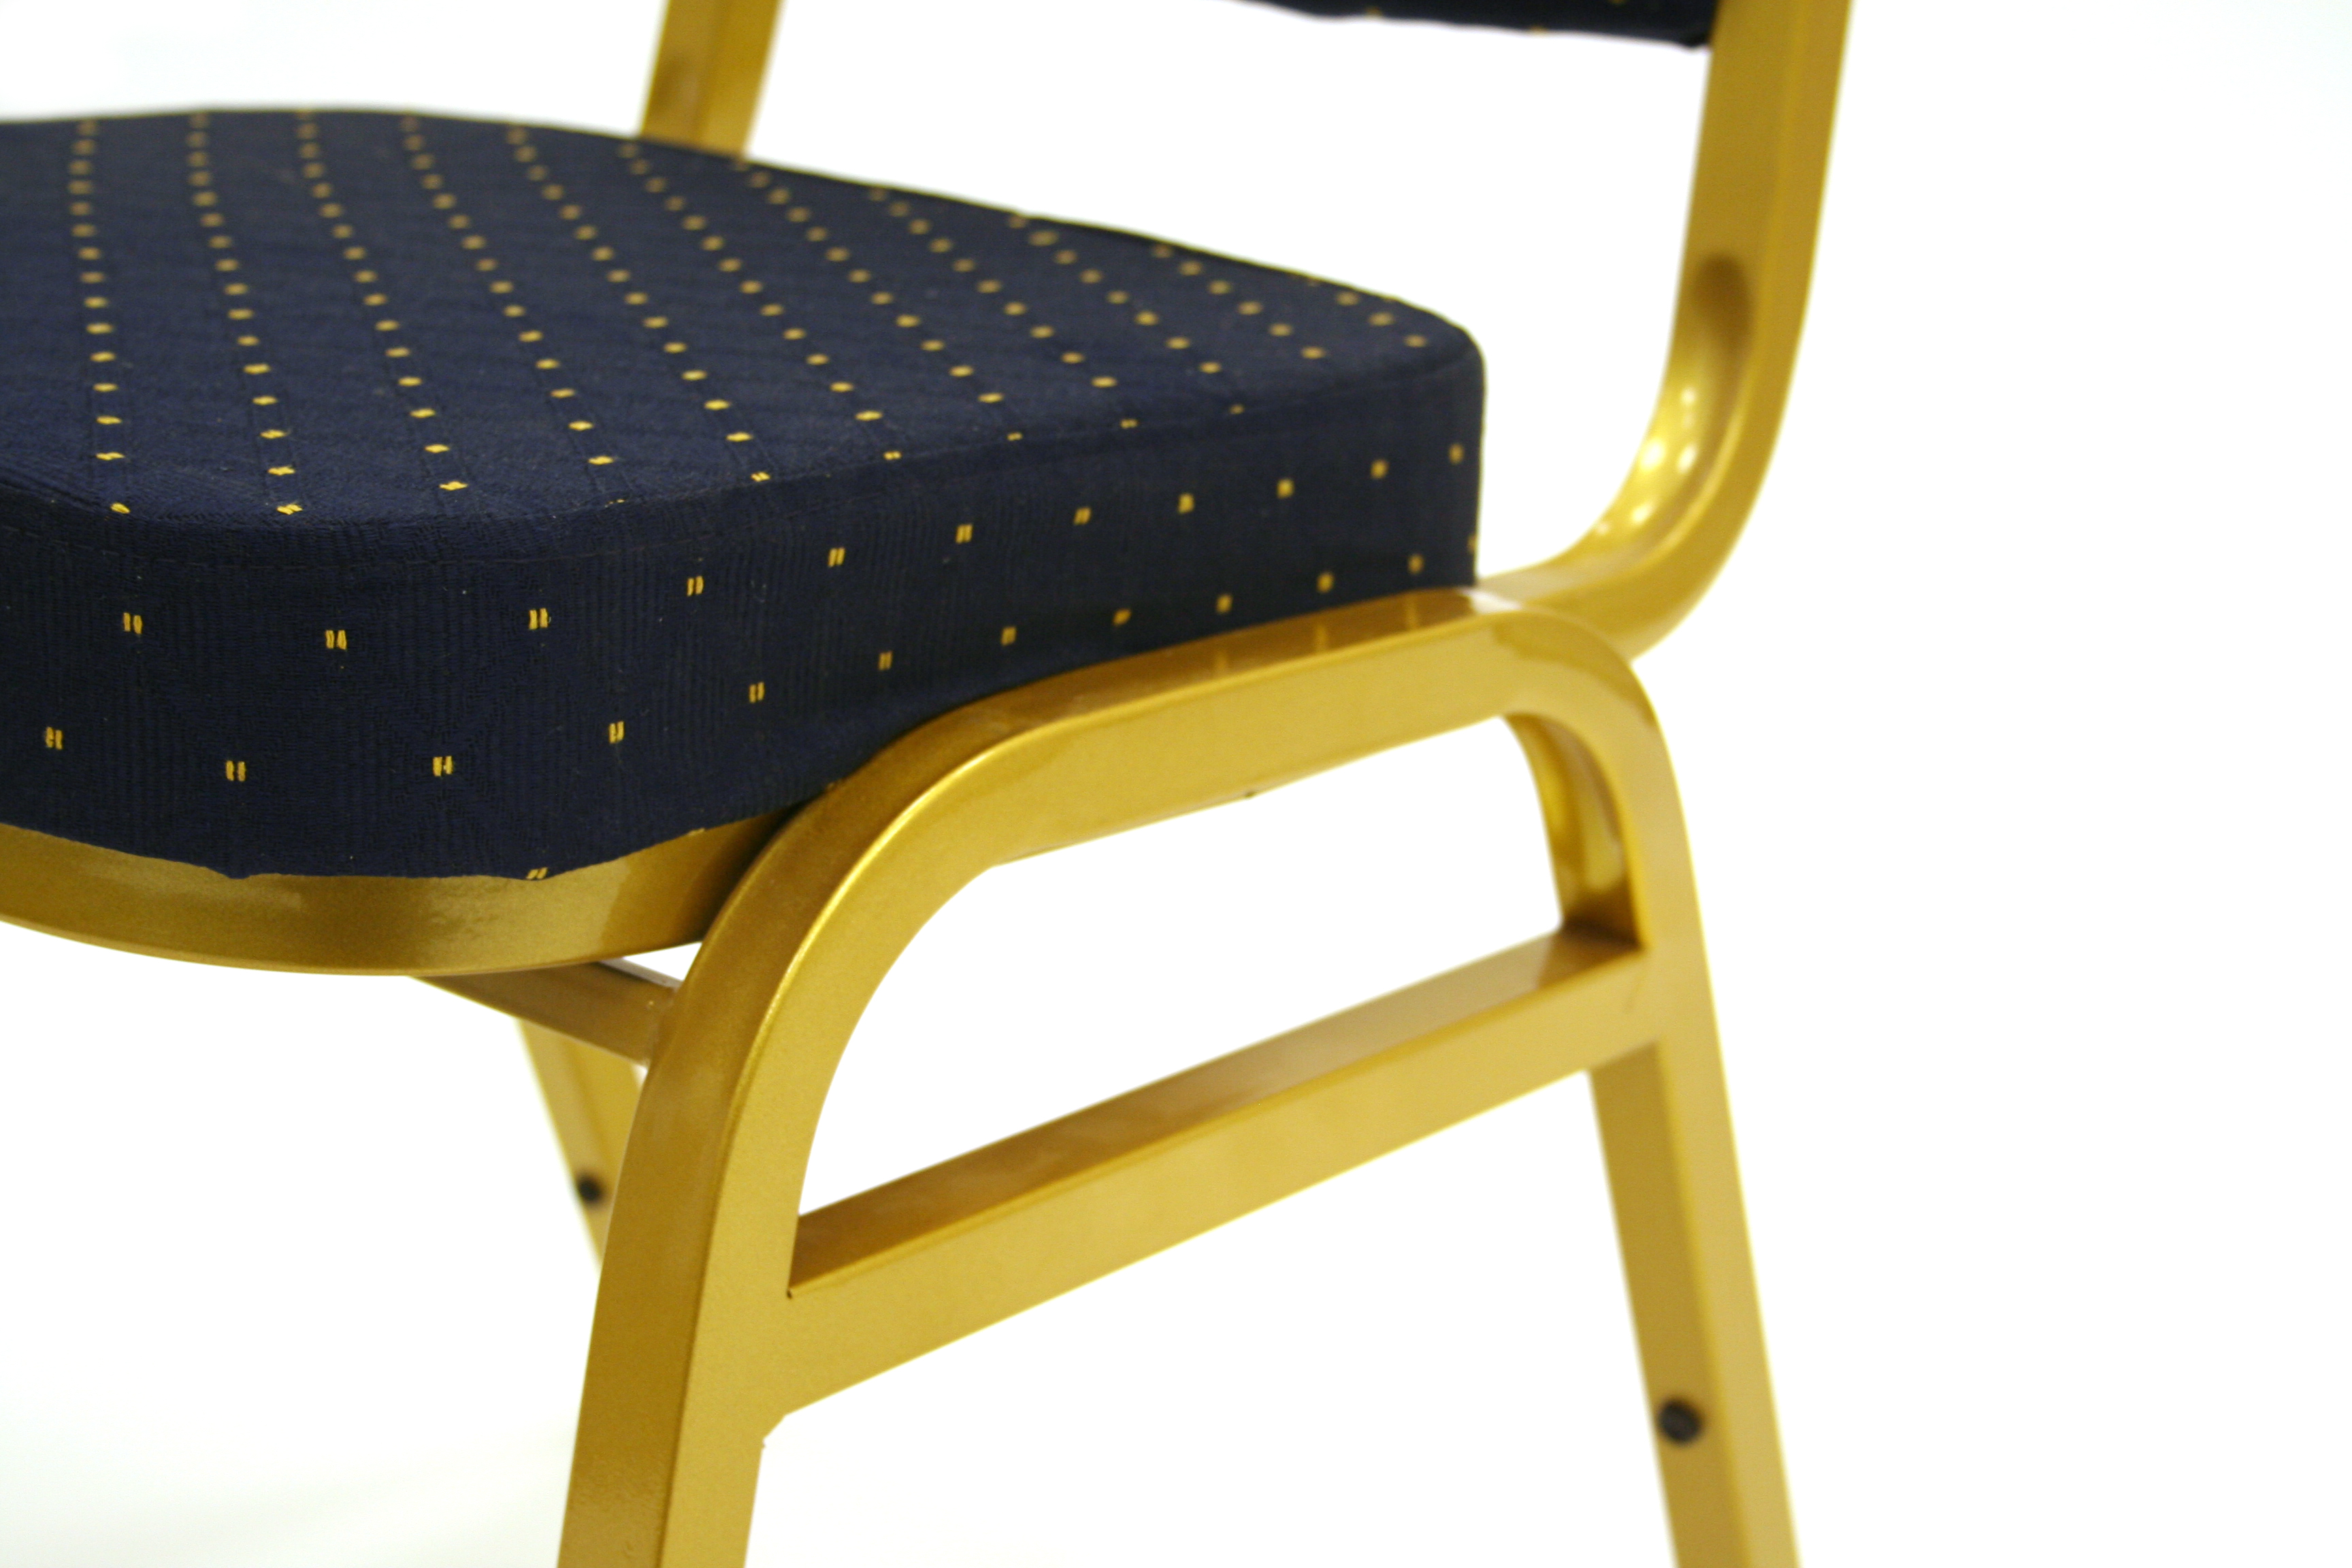 Gold steel framed banquet  chair with a dark blue padded seat & back - BE Event Hire